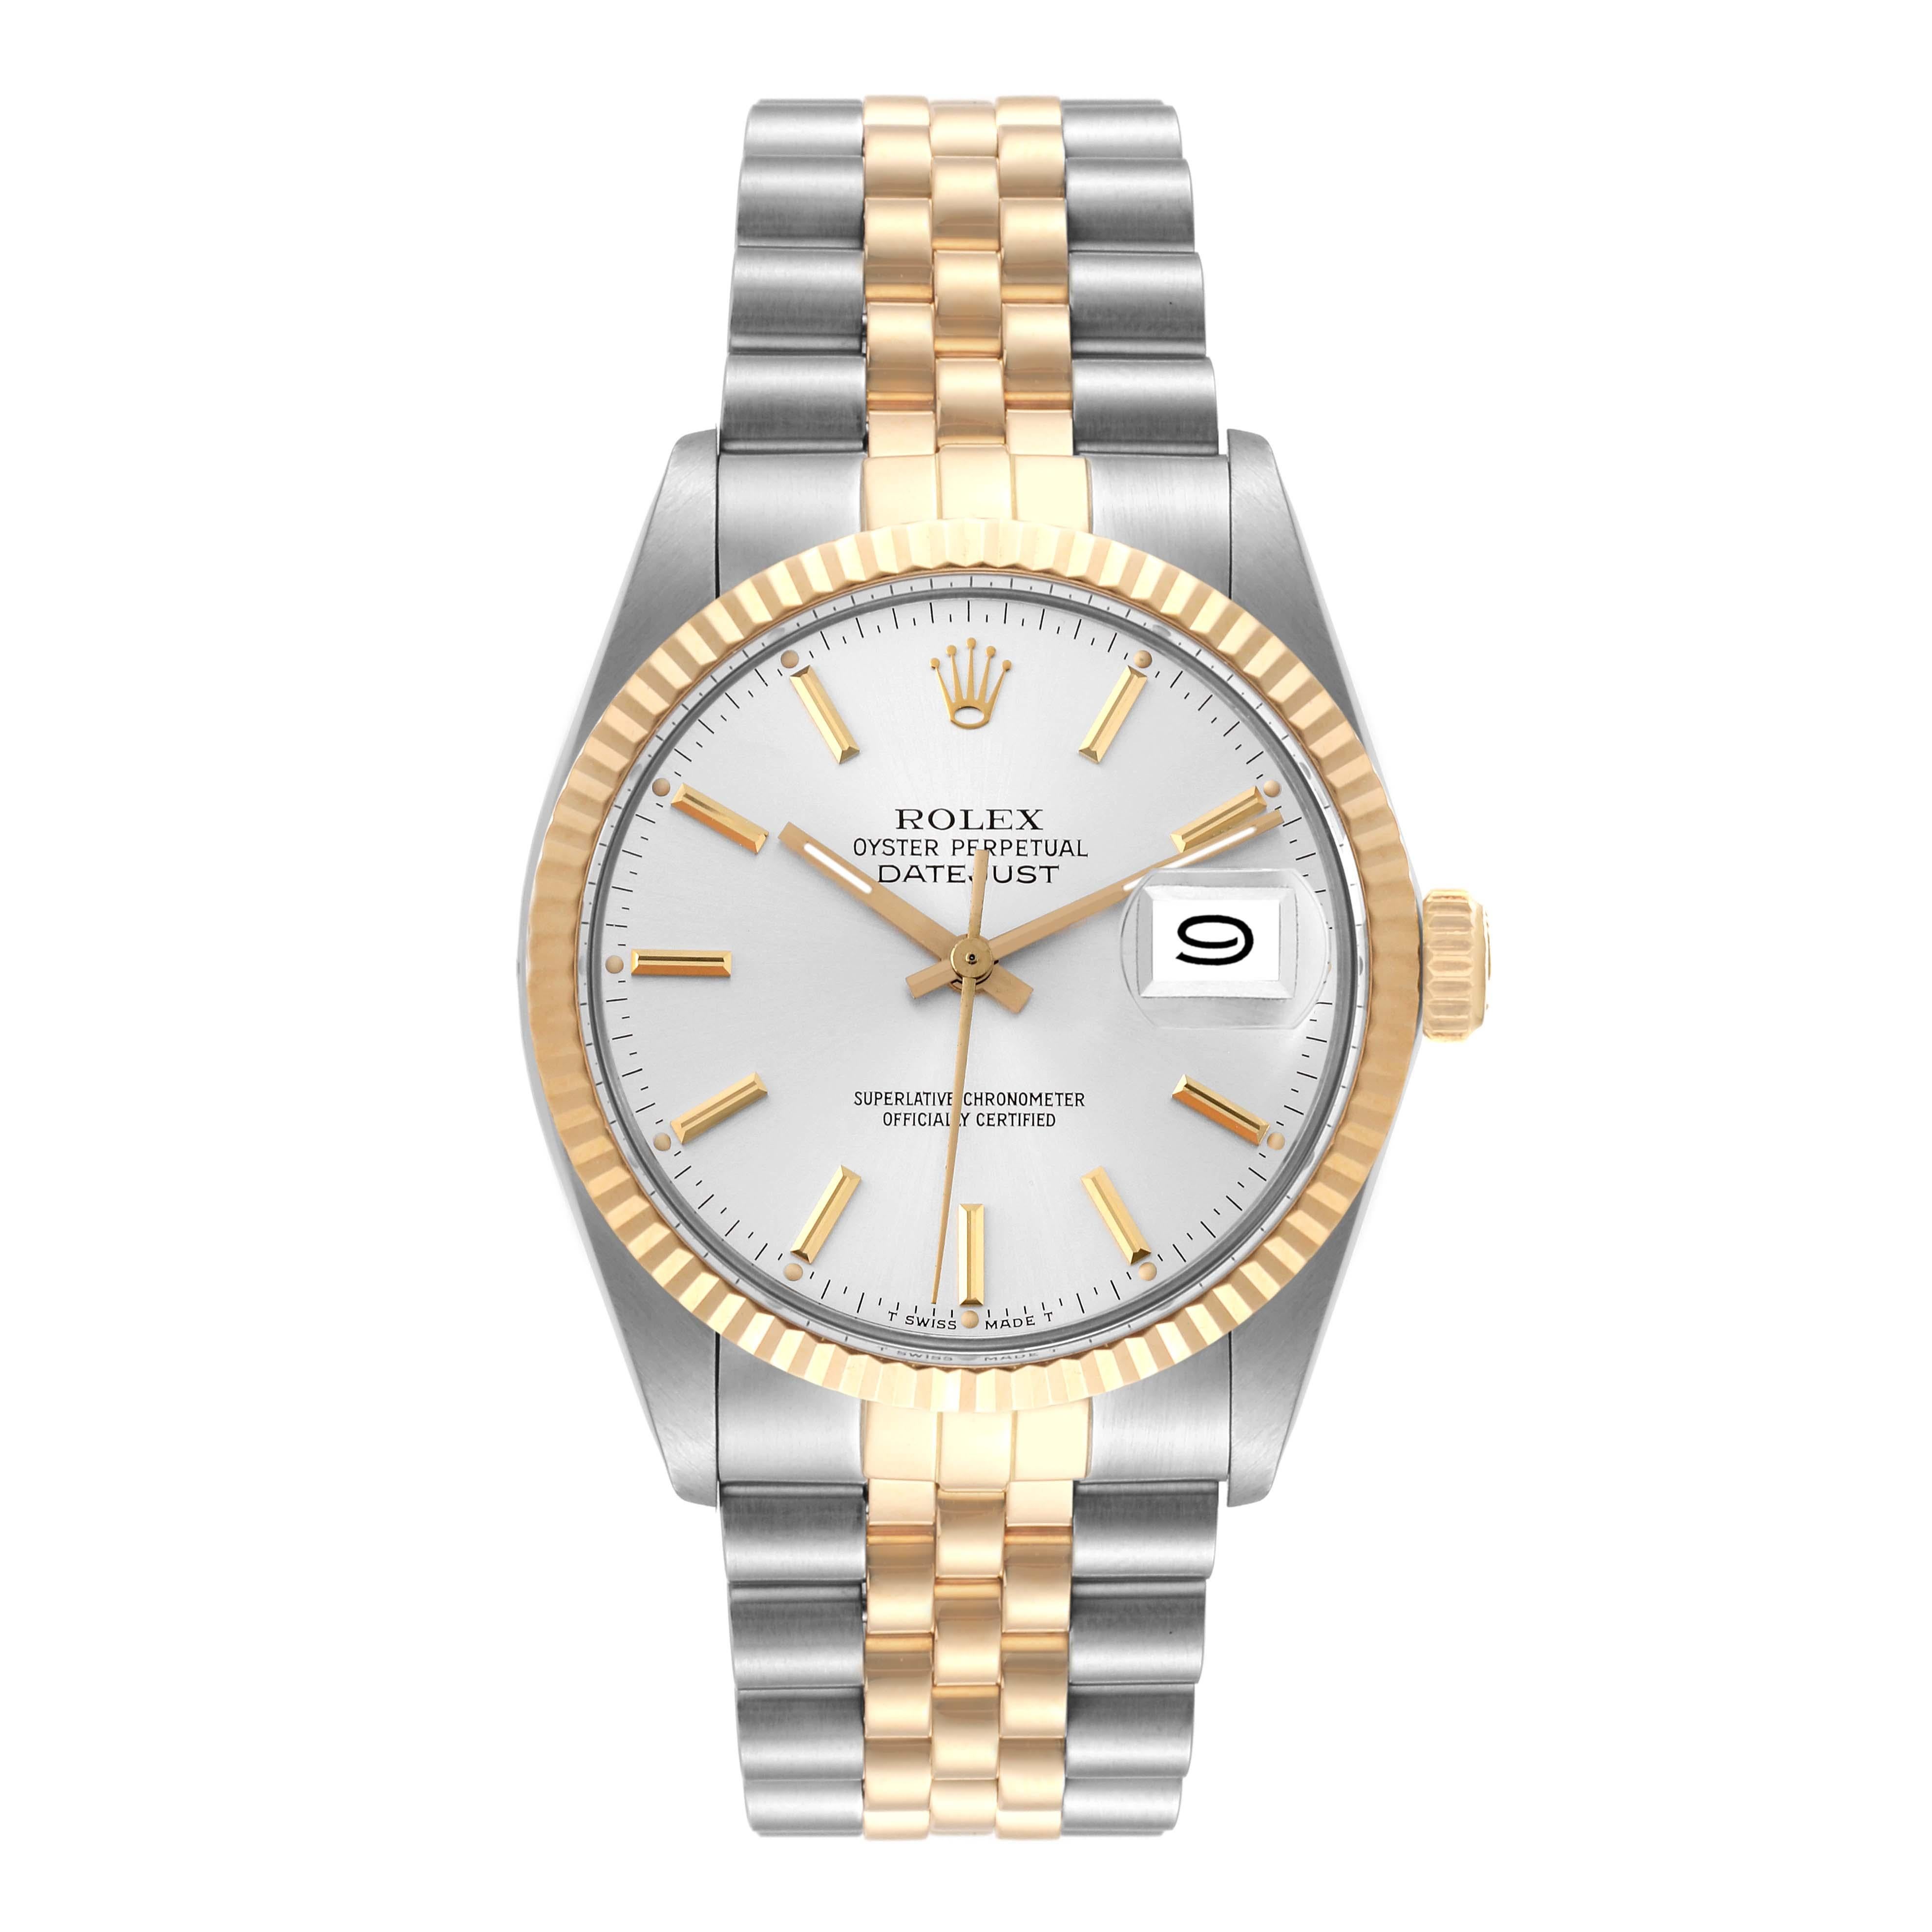 Rolex Datejust Steel Yellow Gold Silver Dial Vintage Mens Watch 16013. Officially certified chronometer self-winding movement. Stainless steel oyster case 36.0 mm in diameter. Rolex logo on a crown. 18k yellow gold fluted bezel. Acrylic crystal with